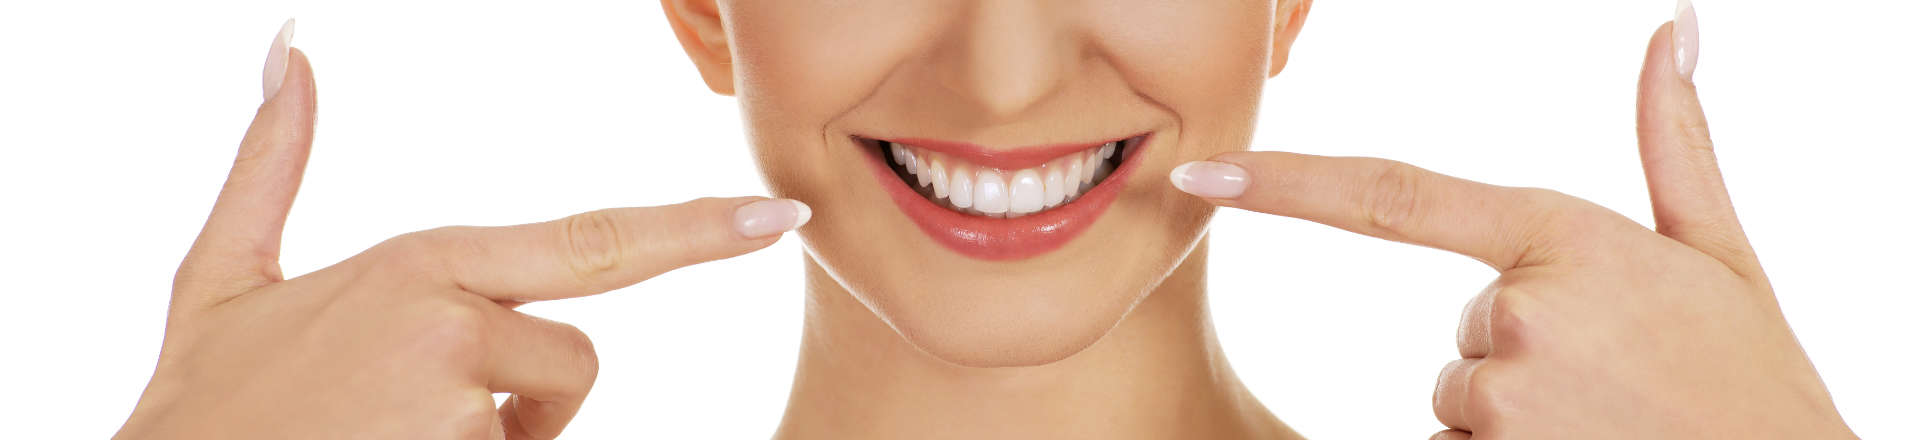 woman pointing at her whitened teeth